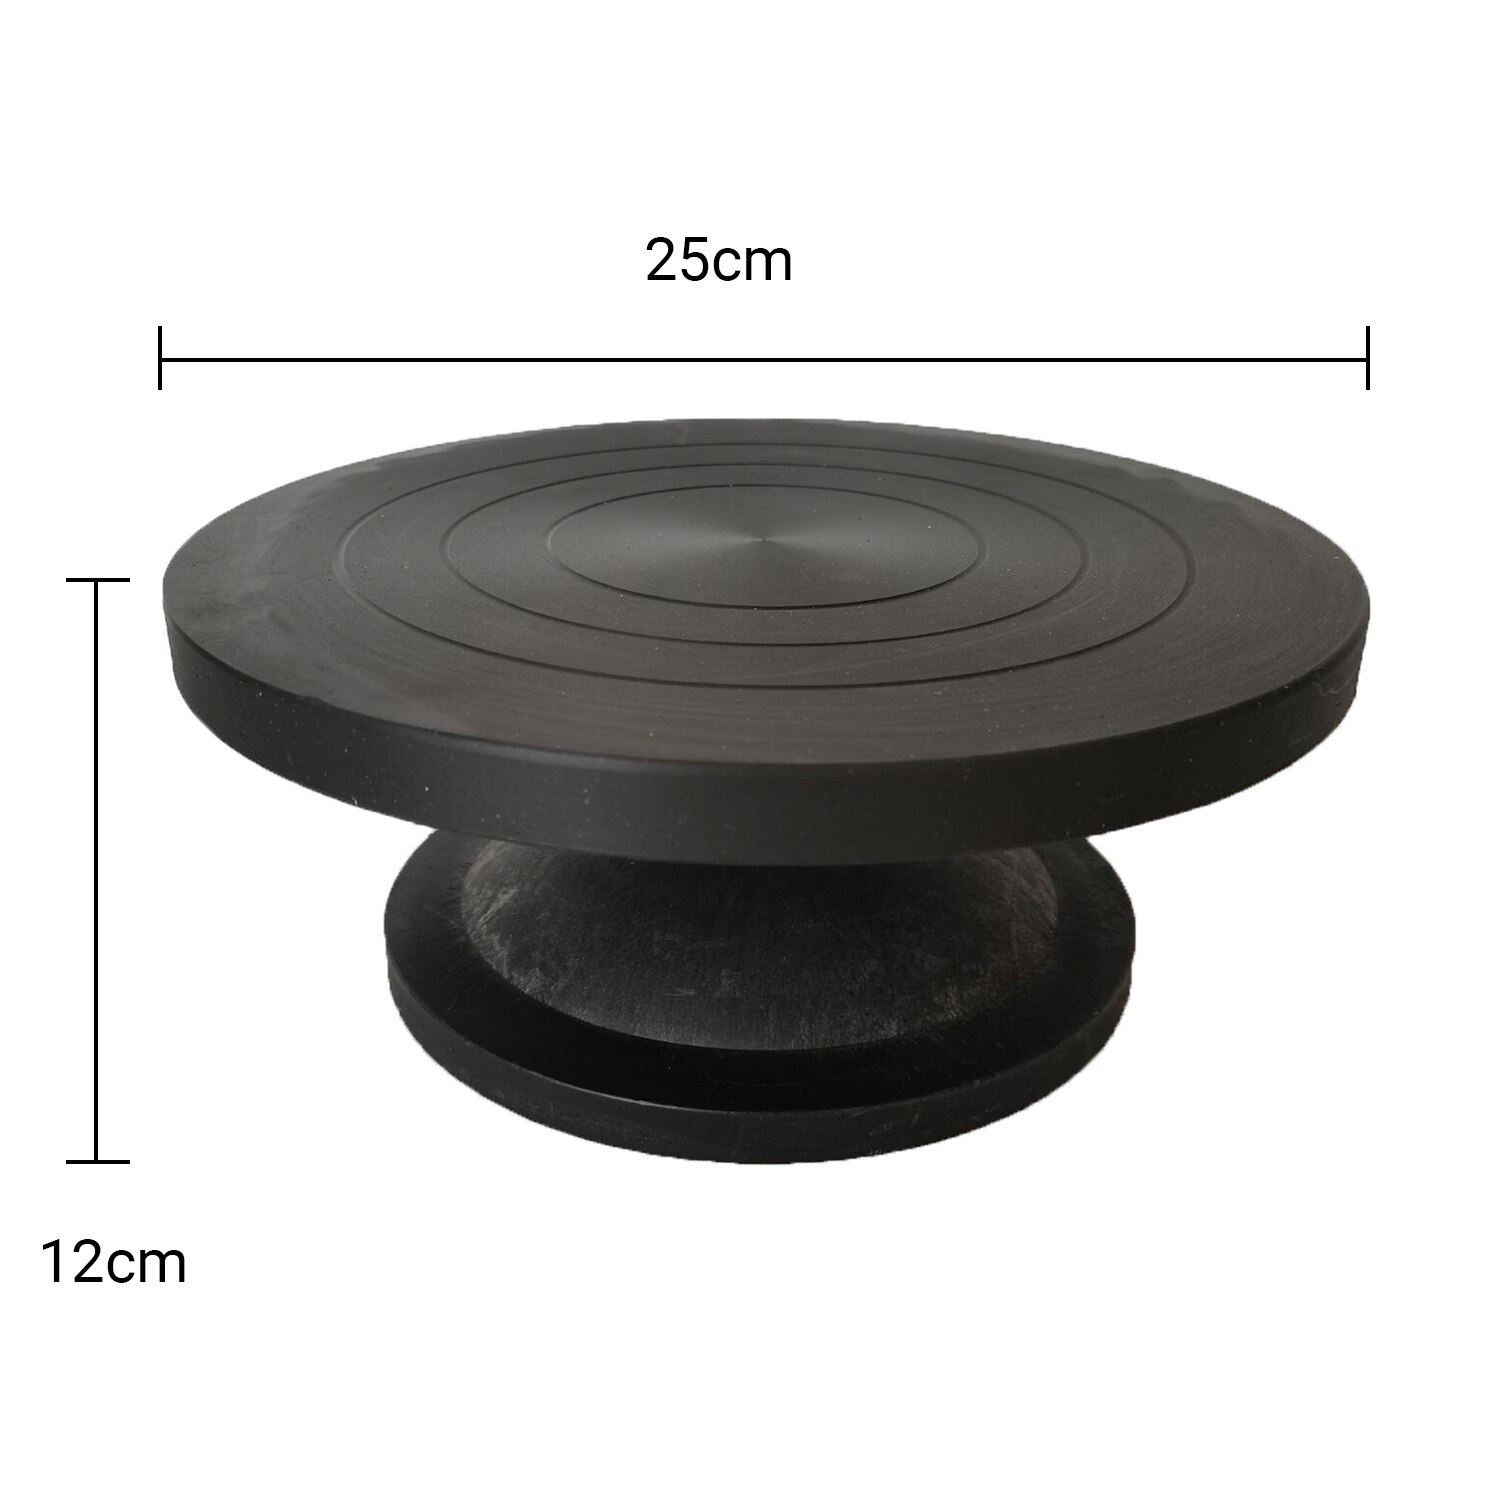 Art Supply 10in Diameter Sculpting Wheel Mini Clay Making Pottery Wheel Turntable with Ball Bearings Pottery Wheel Pottery: 25cm diameter